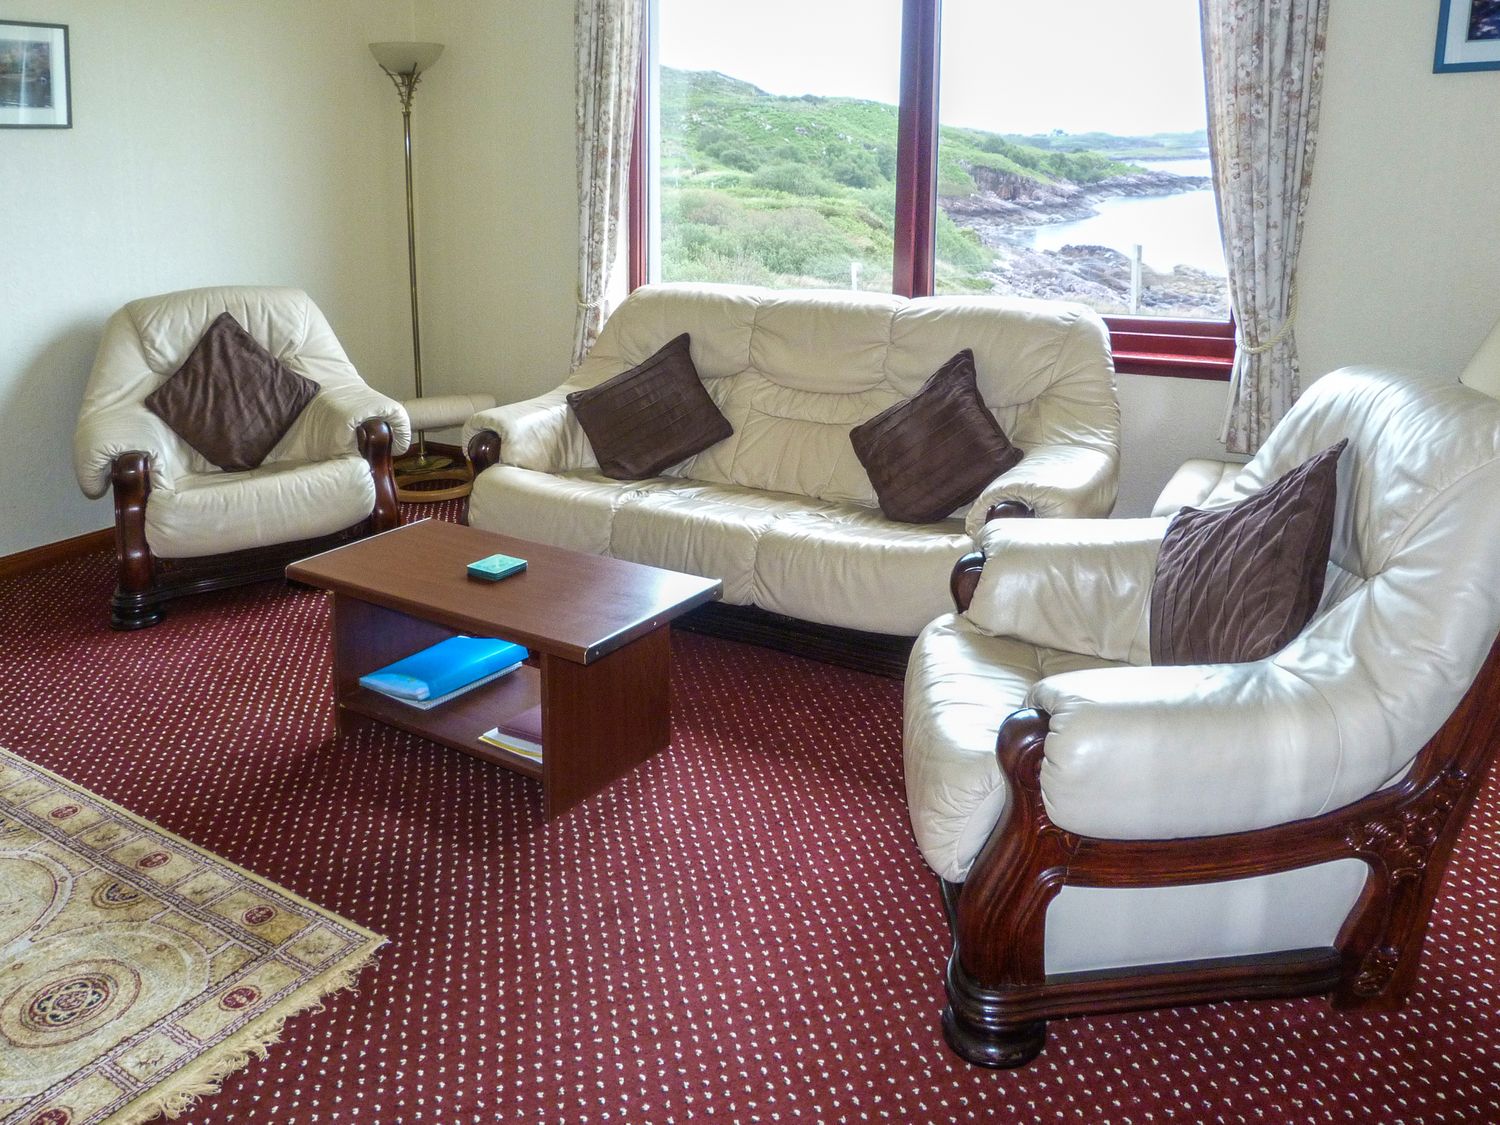 2 BAYVIEW BUNGALOW, Scotland, Scottish Highlands, Ross and Cromarty, Poolewe